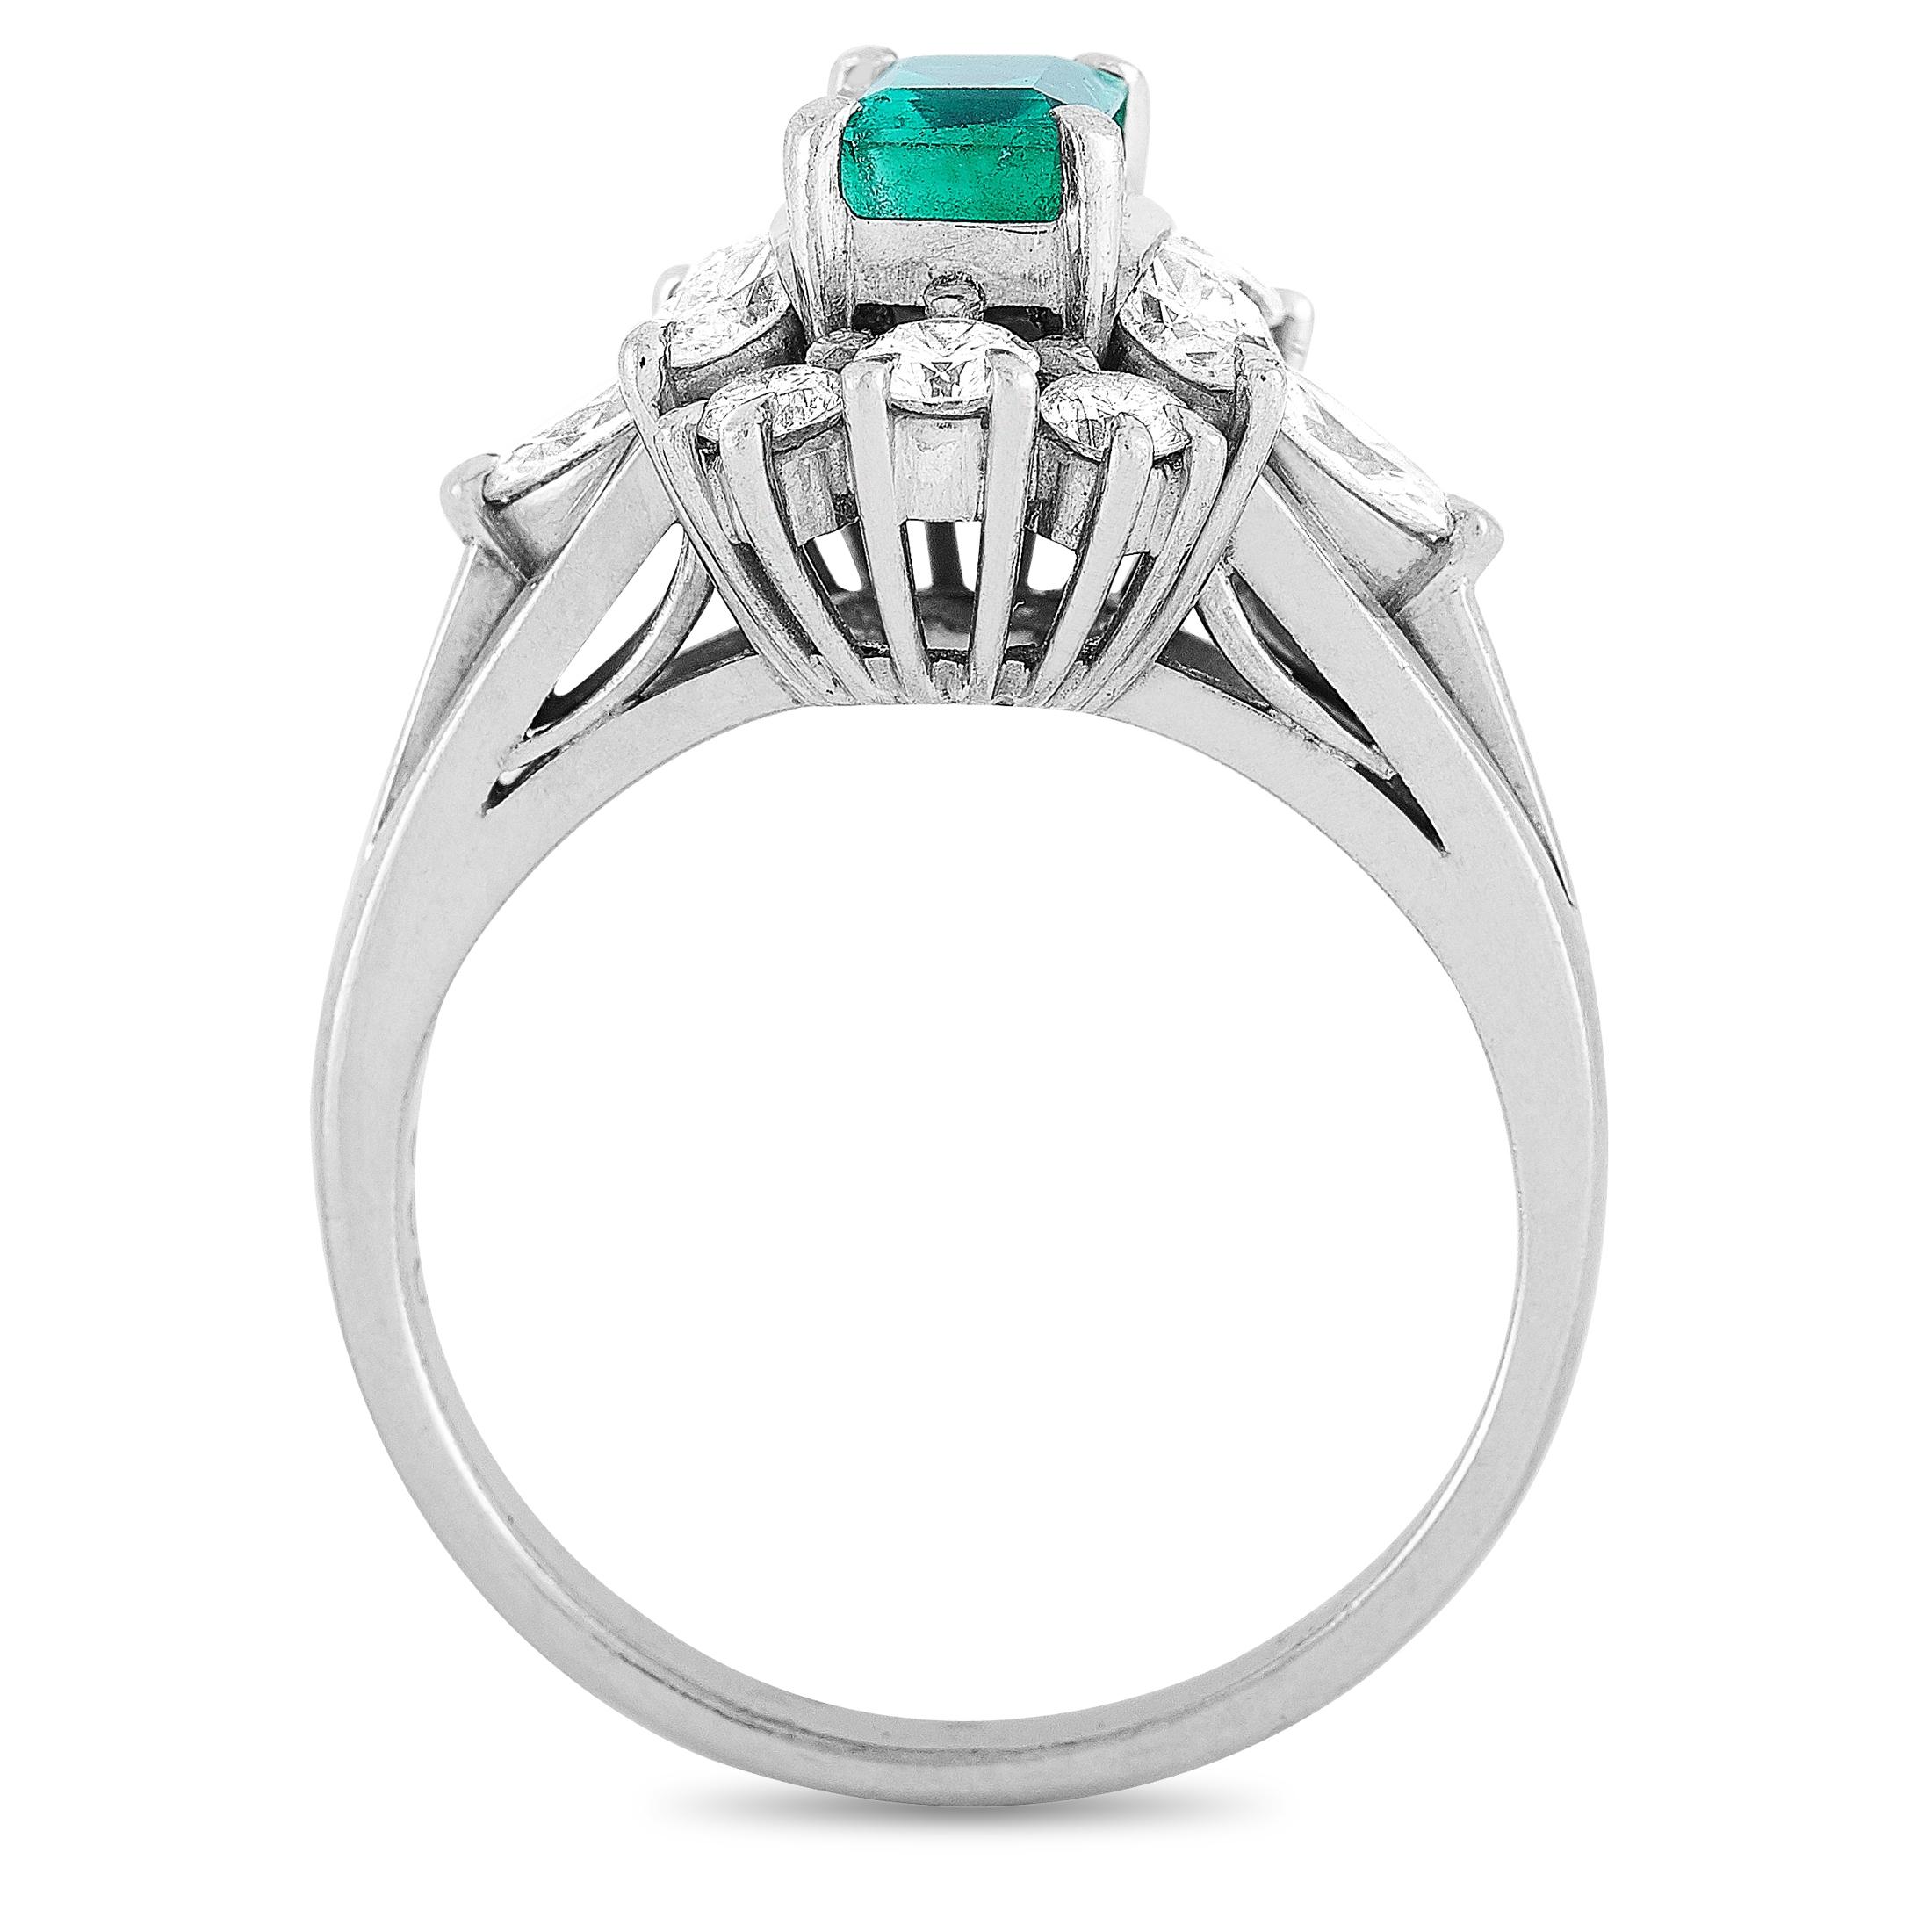 This Mikimoto ring is crafted from platinum and weighs 5.4 grams, boasting band thickness of 2 mm and top height of 9 mm, while top dimensions measure 14 by 11 mm. The ring is set with a 0.54 ct emerald and a total of 0.66 carats of diamonds.
 
